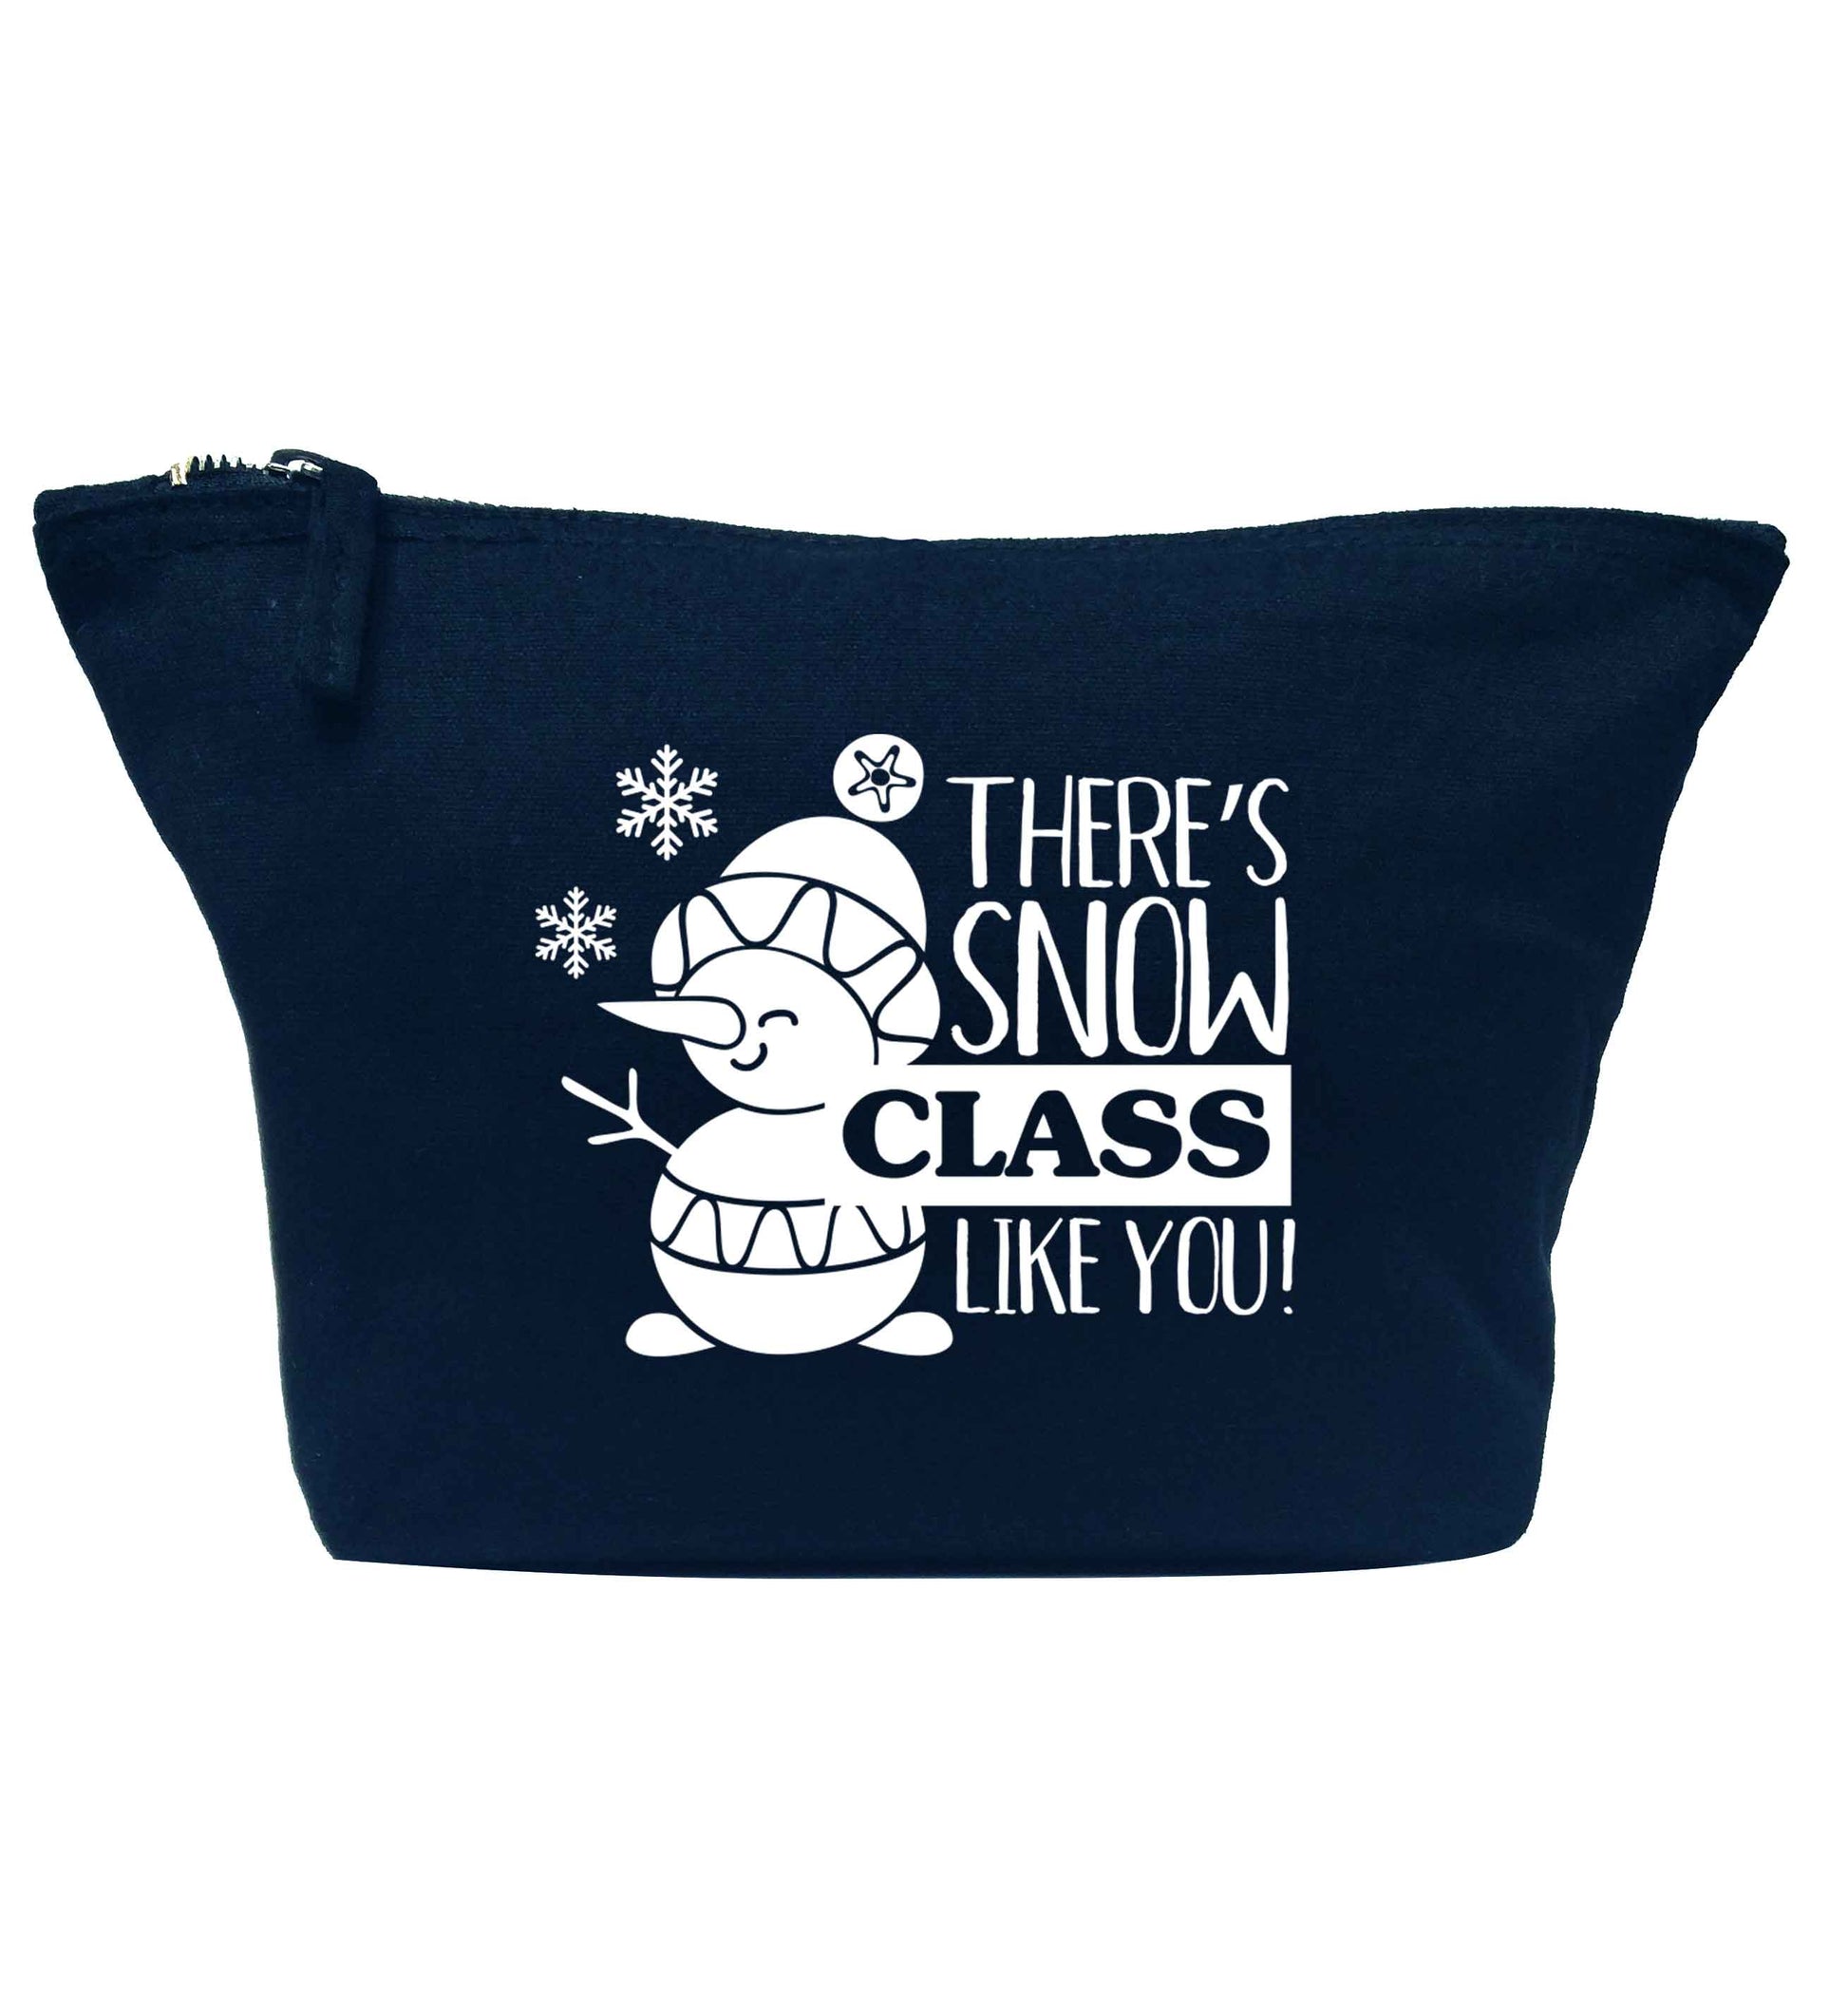 There's snow class like you navy makeup bag